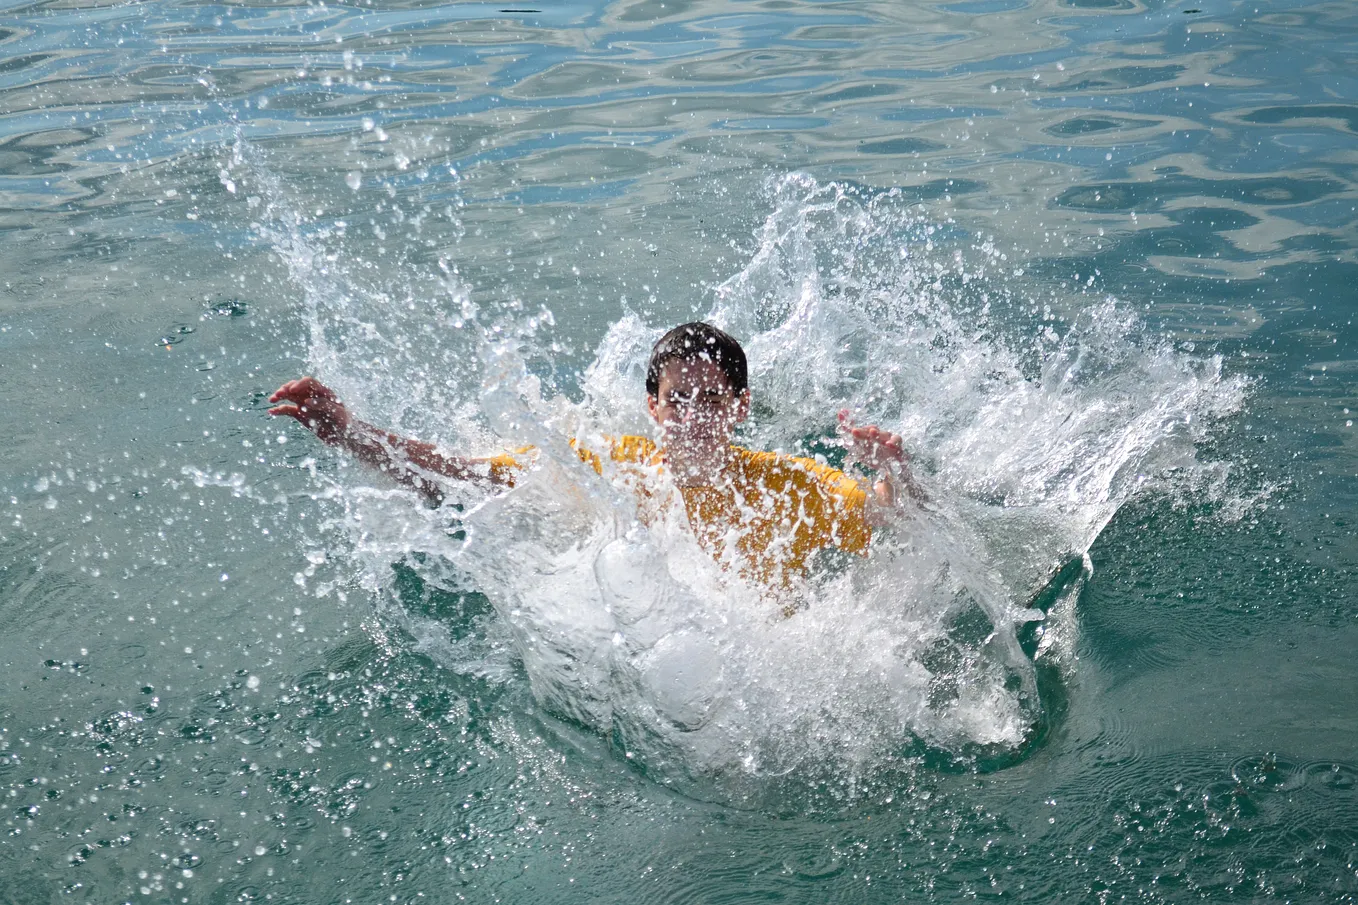 A person wearing a yellow shirt is splashing in the water.